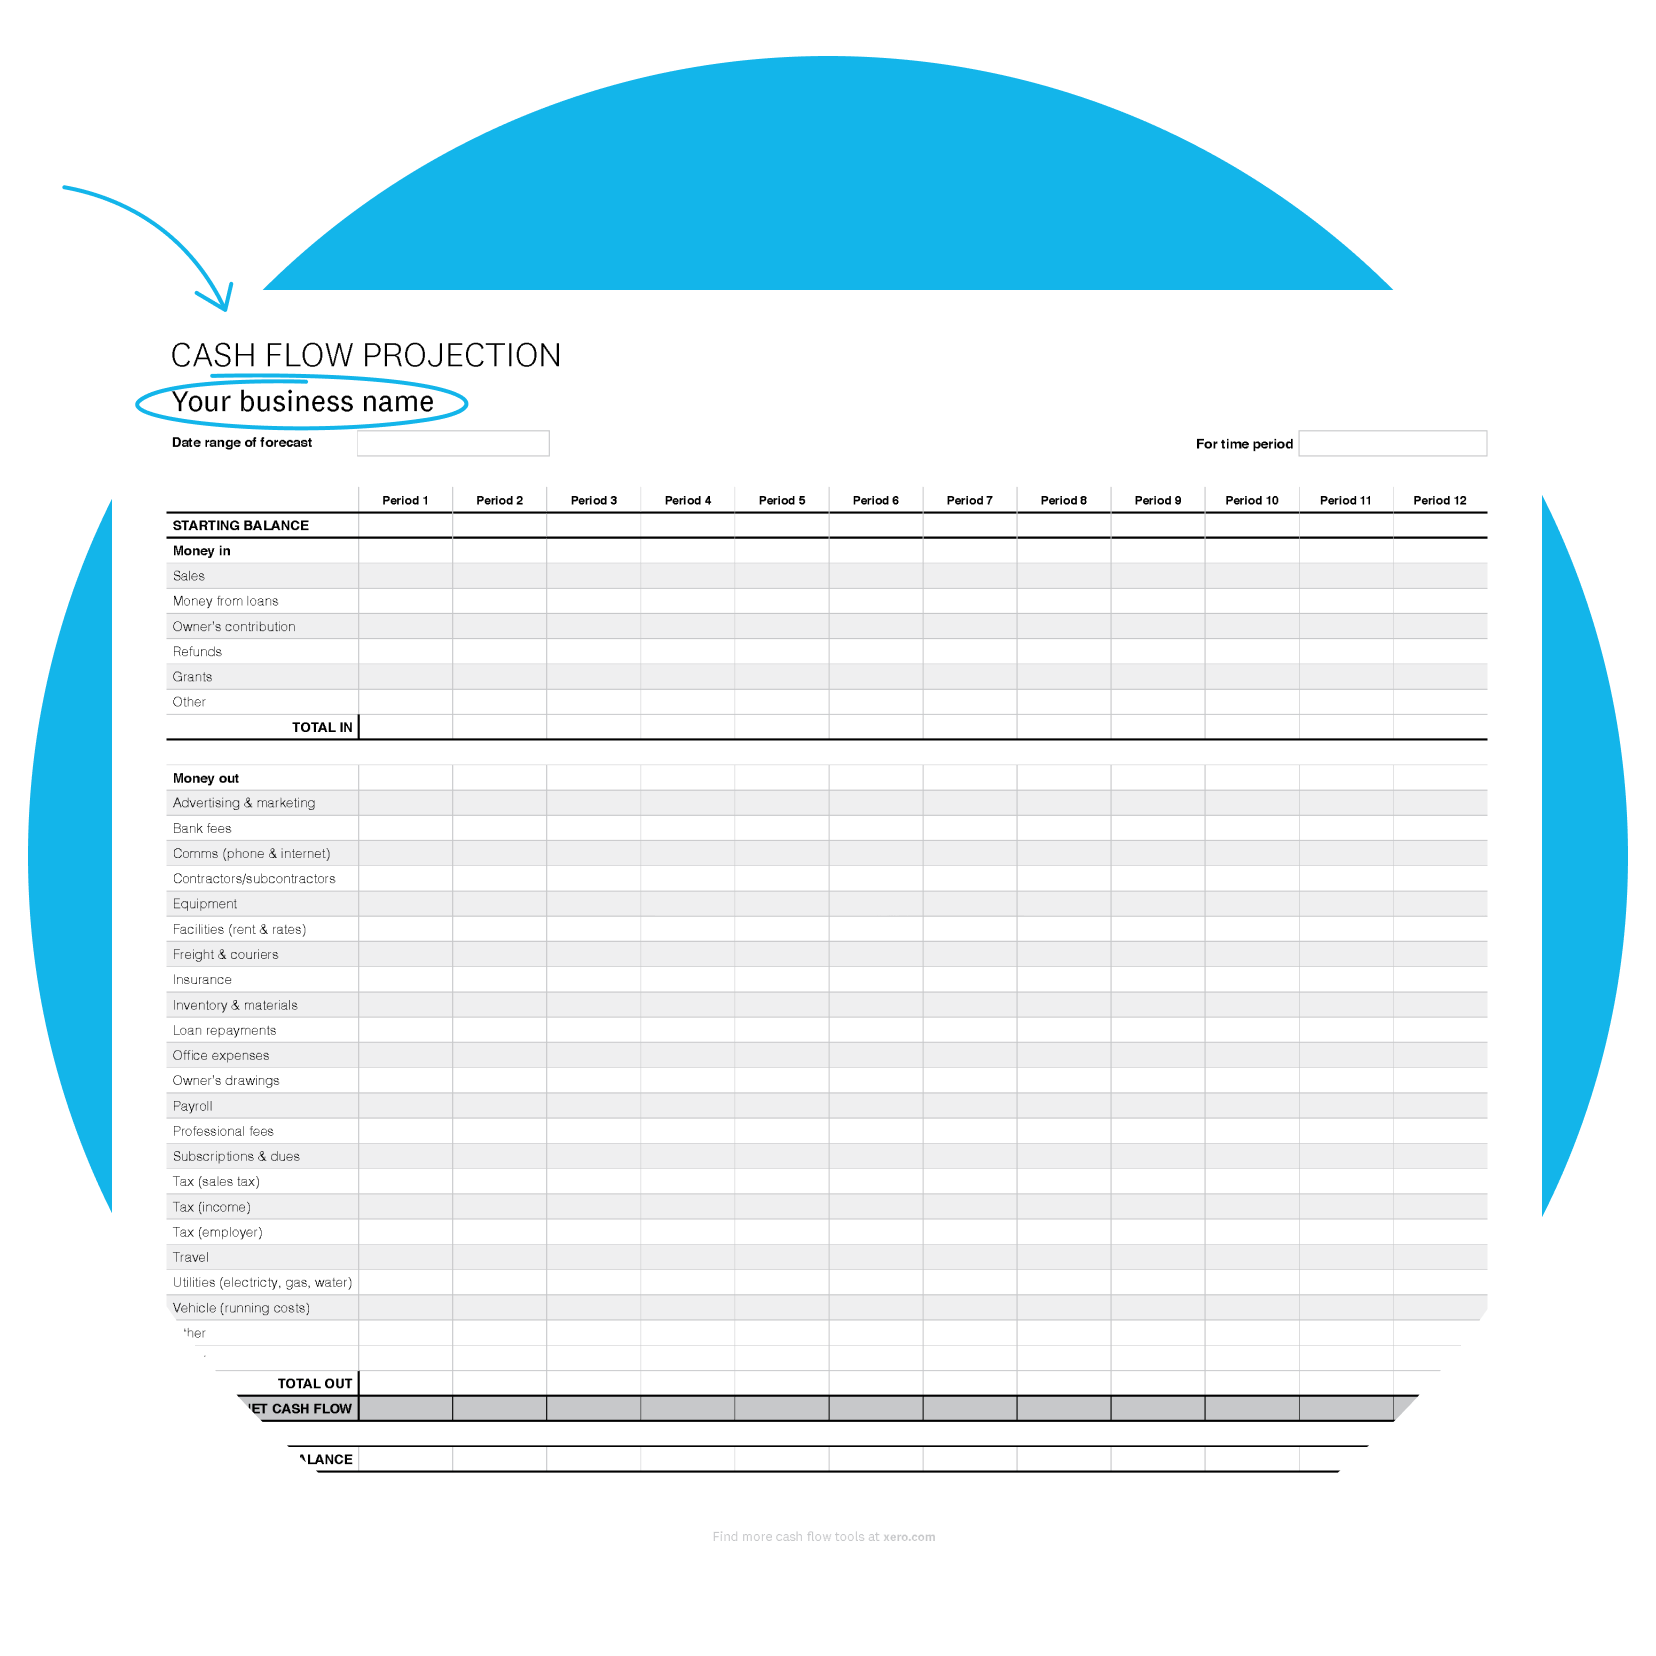 Cash flow projection template with 'your business name' circled